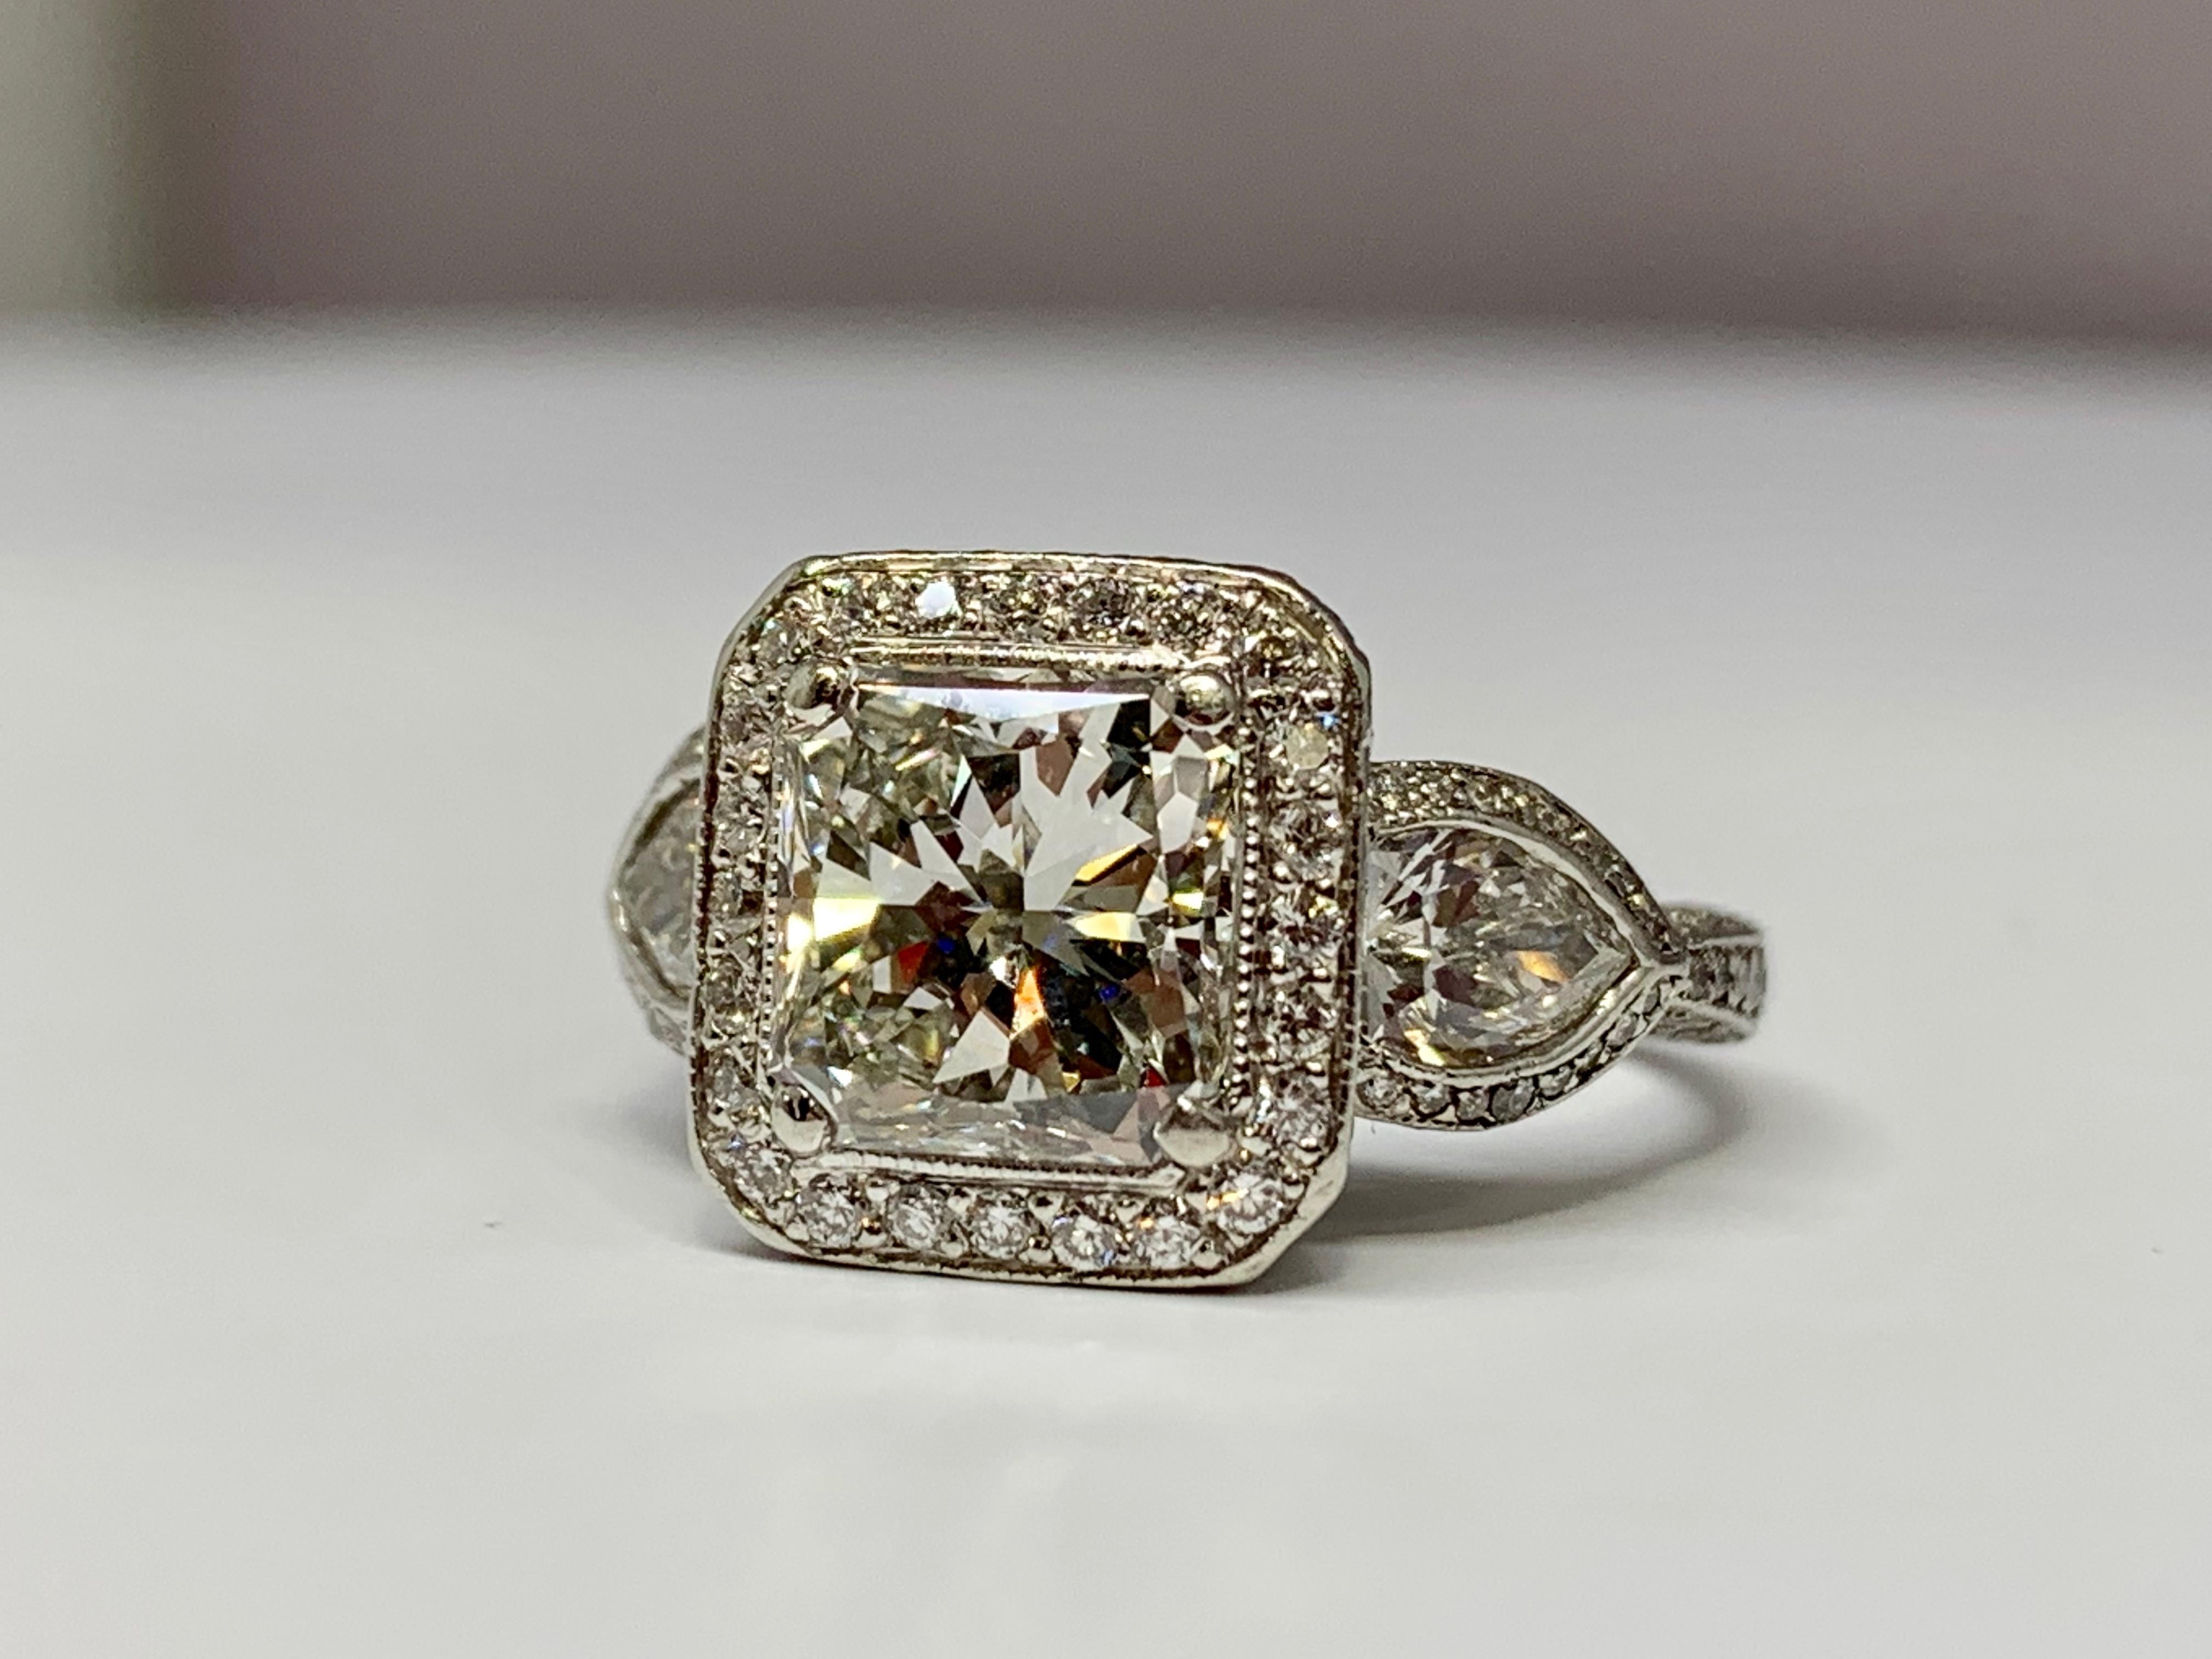 This breathtaking platinum three stone ring designed by JB Star holds a gorgeous center radiant-cut diamond weighing 2.10 carats. The quality of the center stone is approximately H/VS1. The mounting hold a total diamond weight of 1.60 carats,